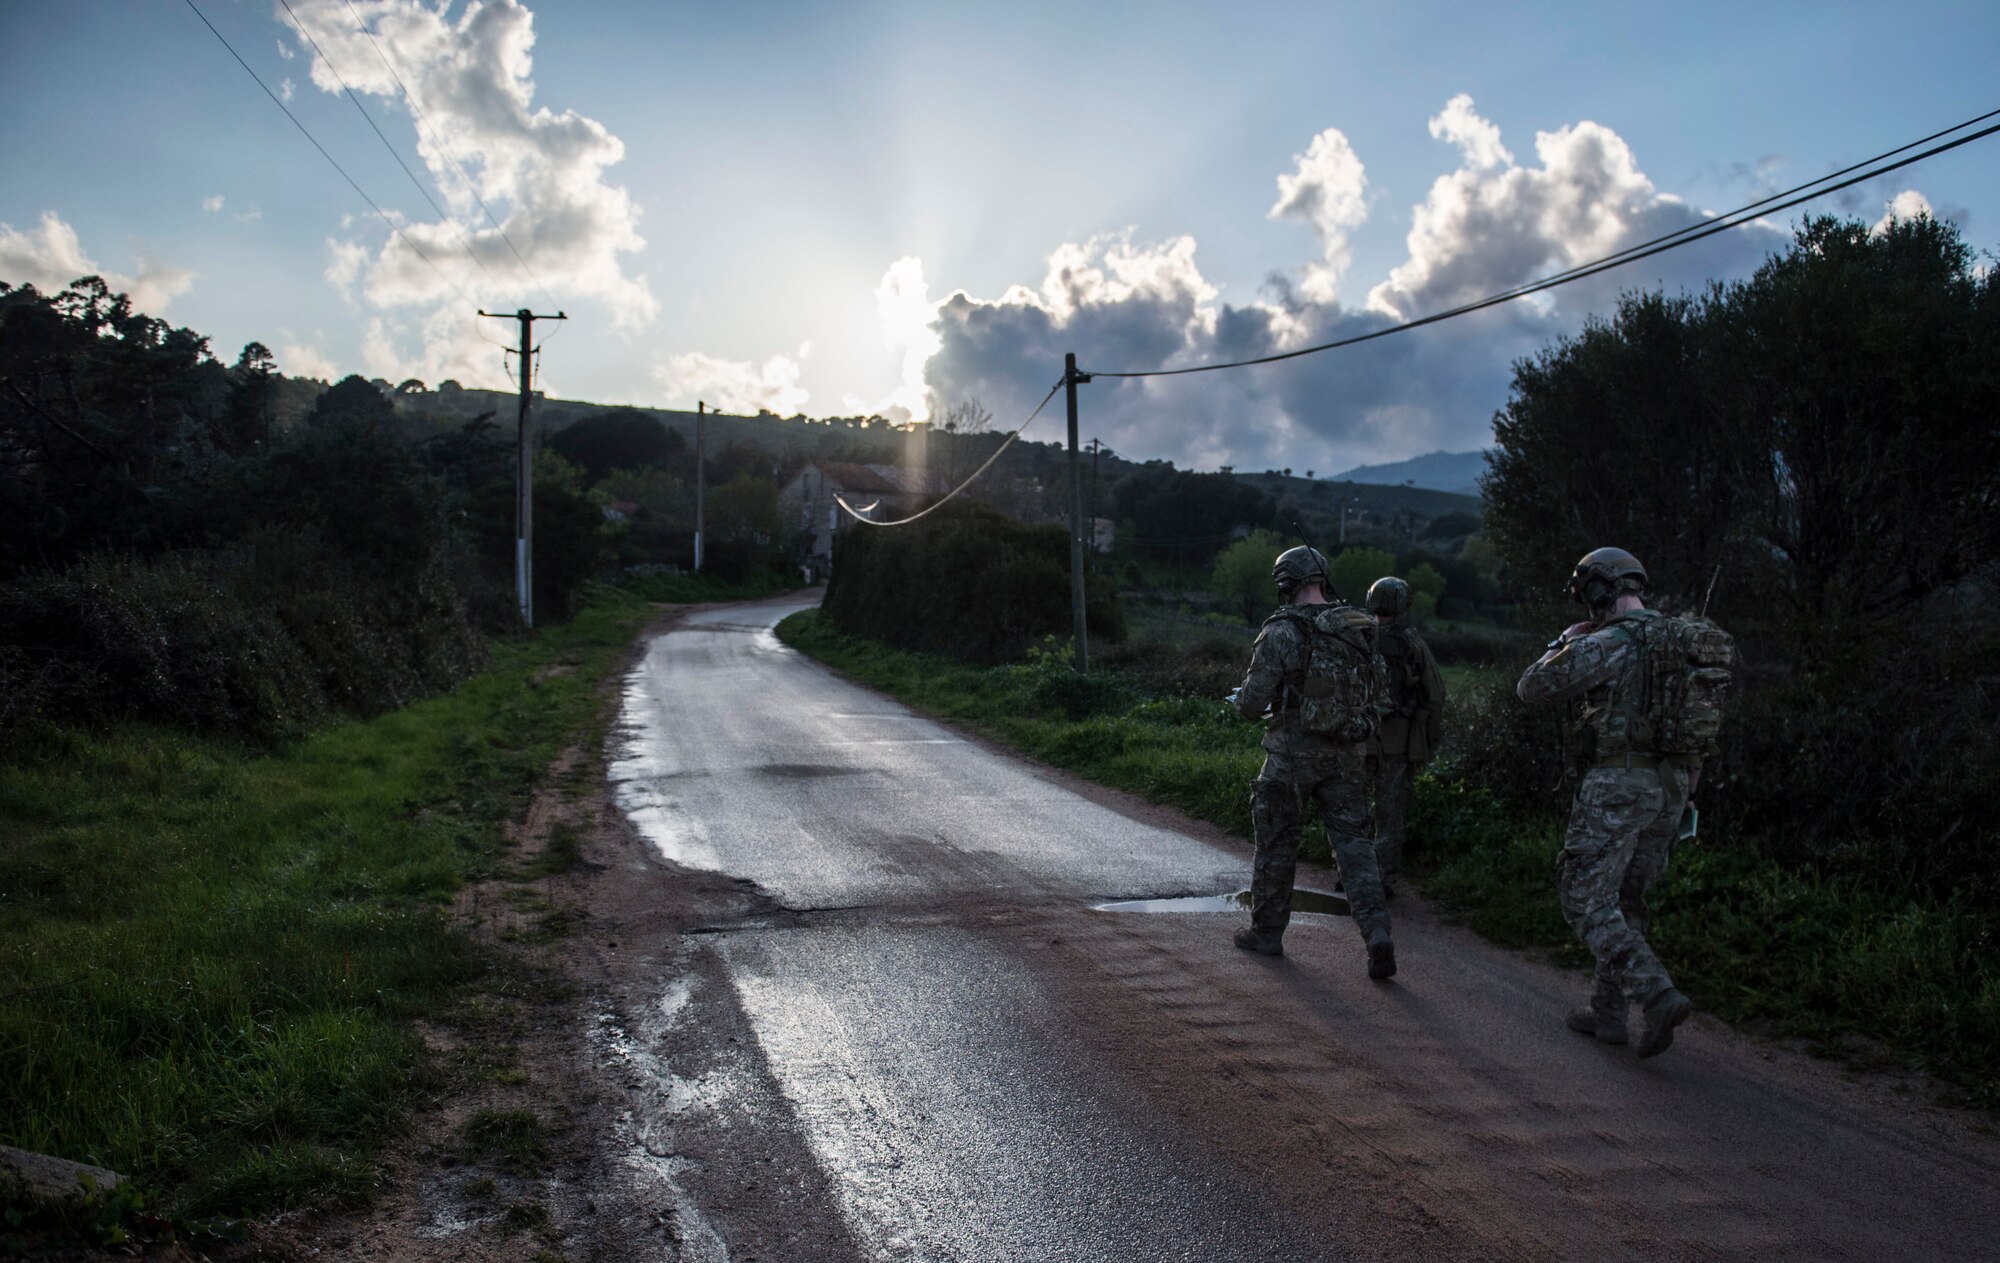 Tech. Sgt. Jeremy Rarang, Senior Airman Tormod Lillekroken and Staff Sgt. Seth Hunt, 2nd Air Support Operations Squadron joint terminal attack controllers, walk along a road as part of a training scenario during Exercise Serpentex ‘16 in Corsica, France, March 15, 2016. JTACs are considered qualified service members who direct the action of air and surfaced-based fires at the tactical level. They are the Airmen on the ground with the authority to control and call in airstrikes on target. (U.S. Air Force photo/Staff Sgt. Sara Keller)